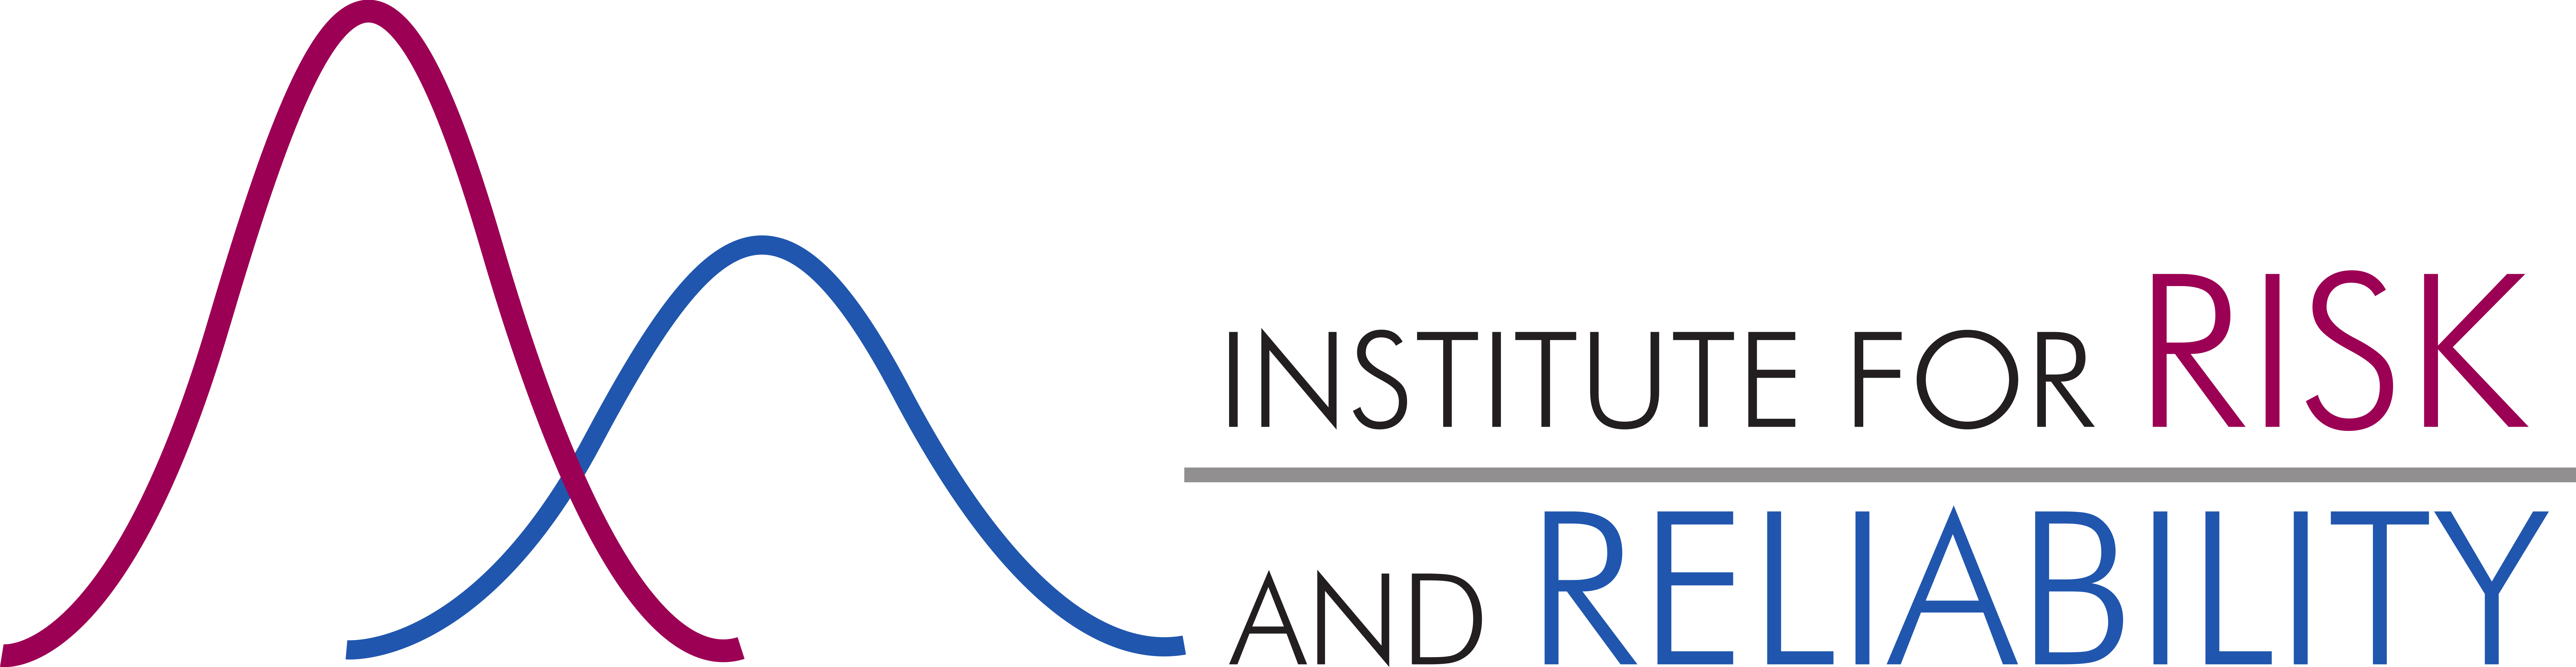 Logo Institute for Risk and Reliability